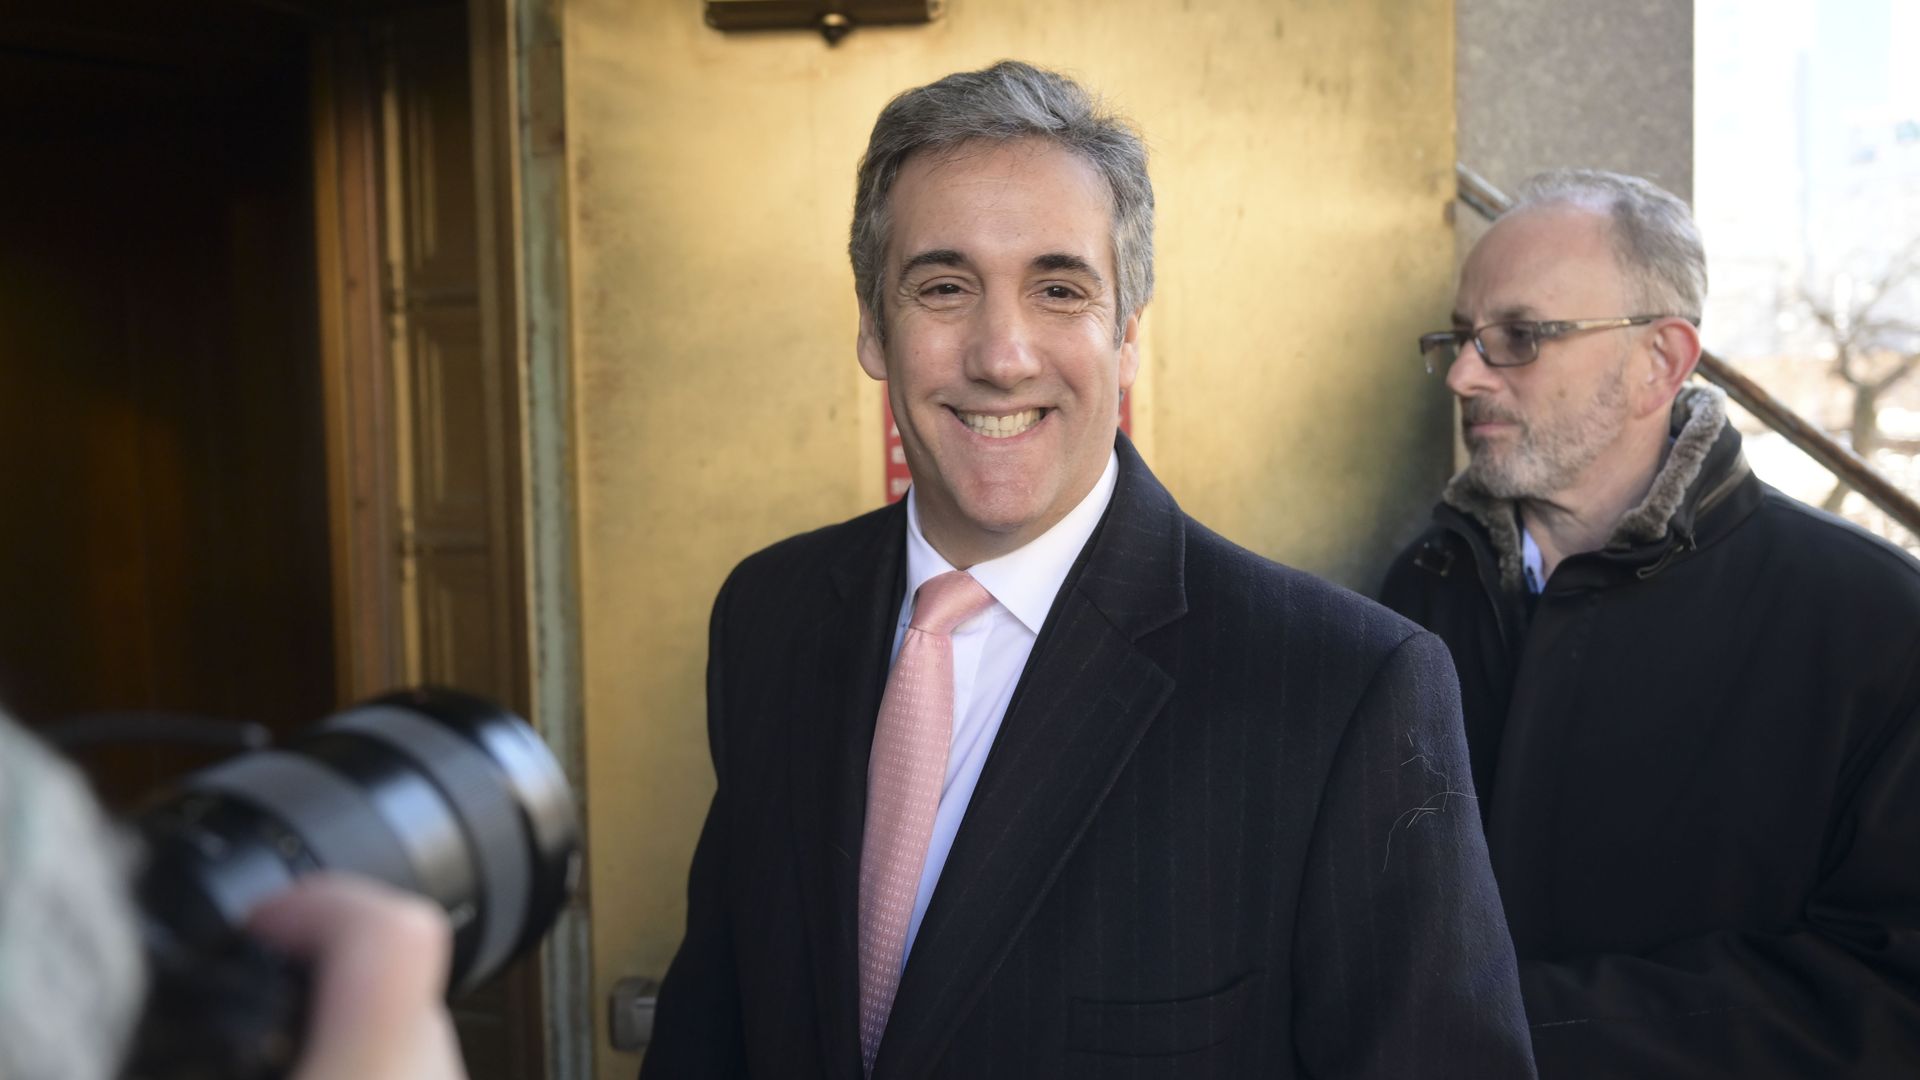 Michael Cohen, Donald Trump's former lawyer and fixer, walks out of a Manhattan courthouse after testifying before a grand jury, in New York, United States on March 15, 2023